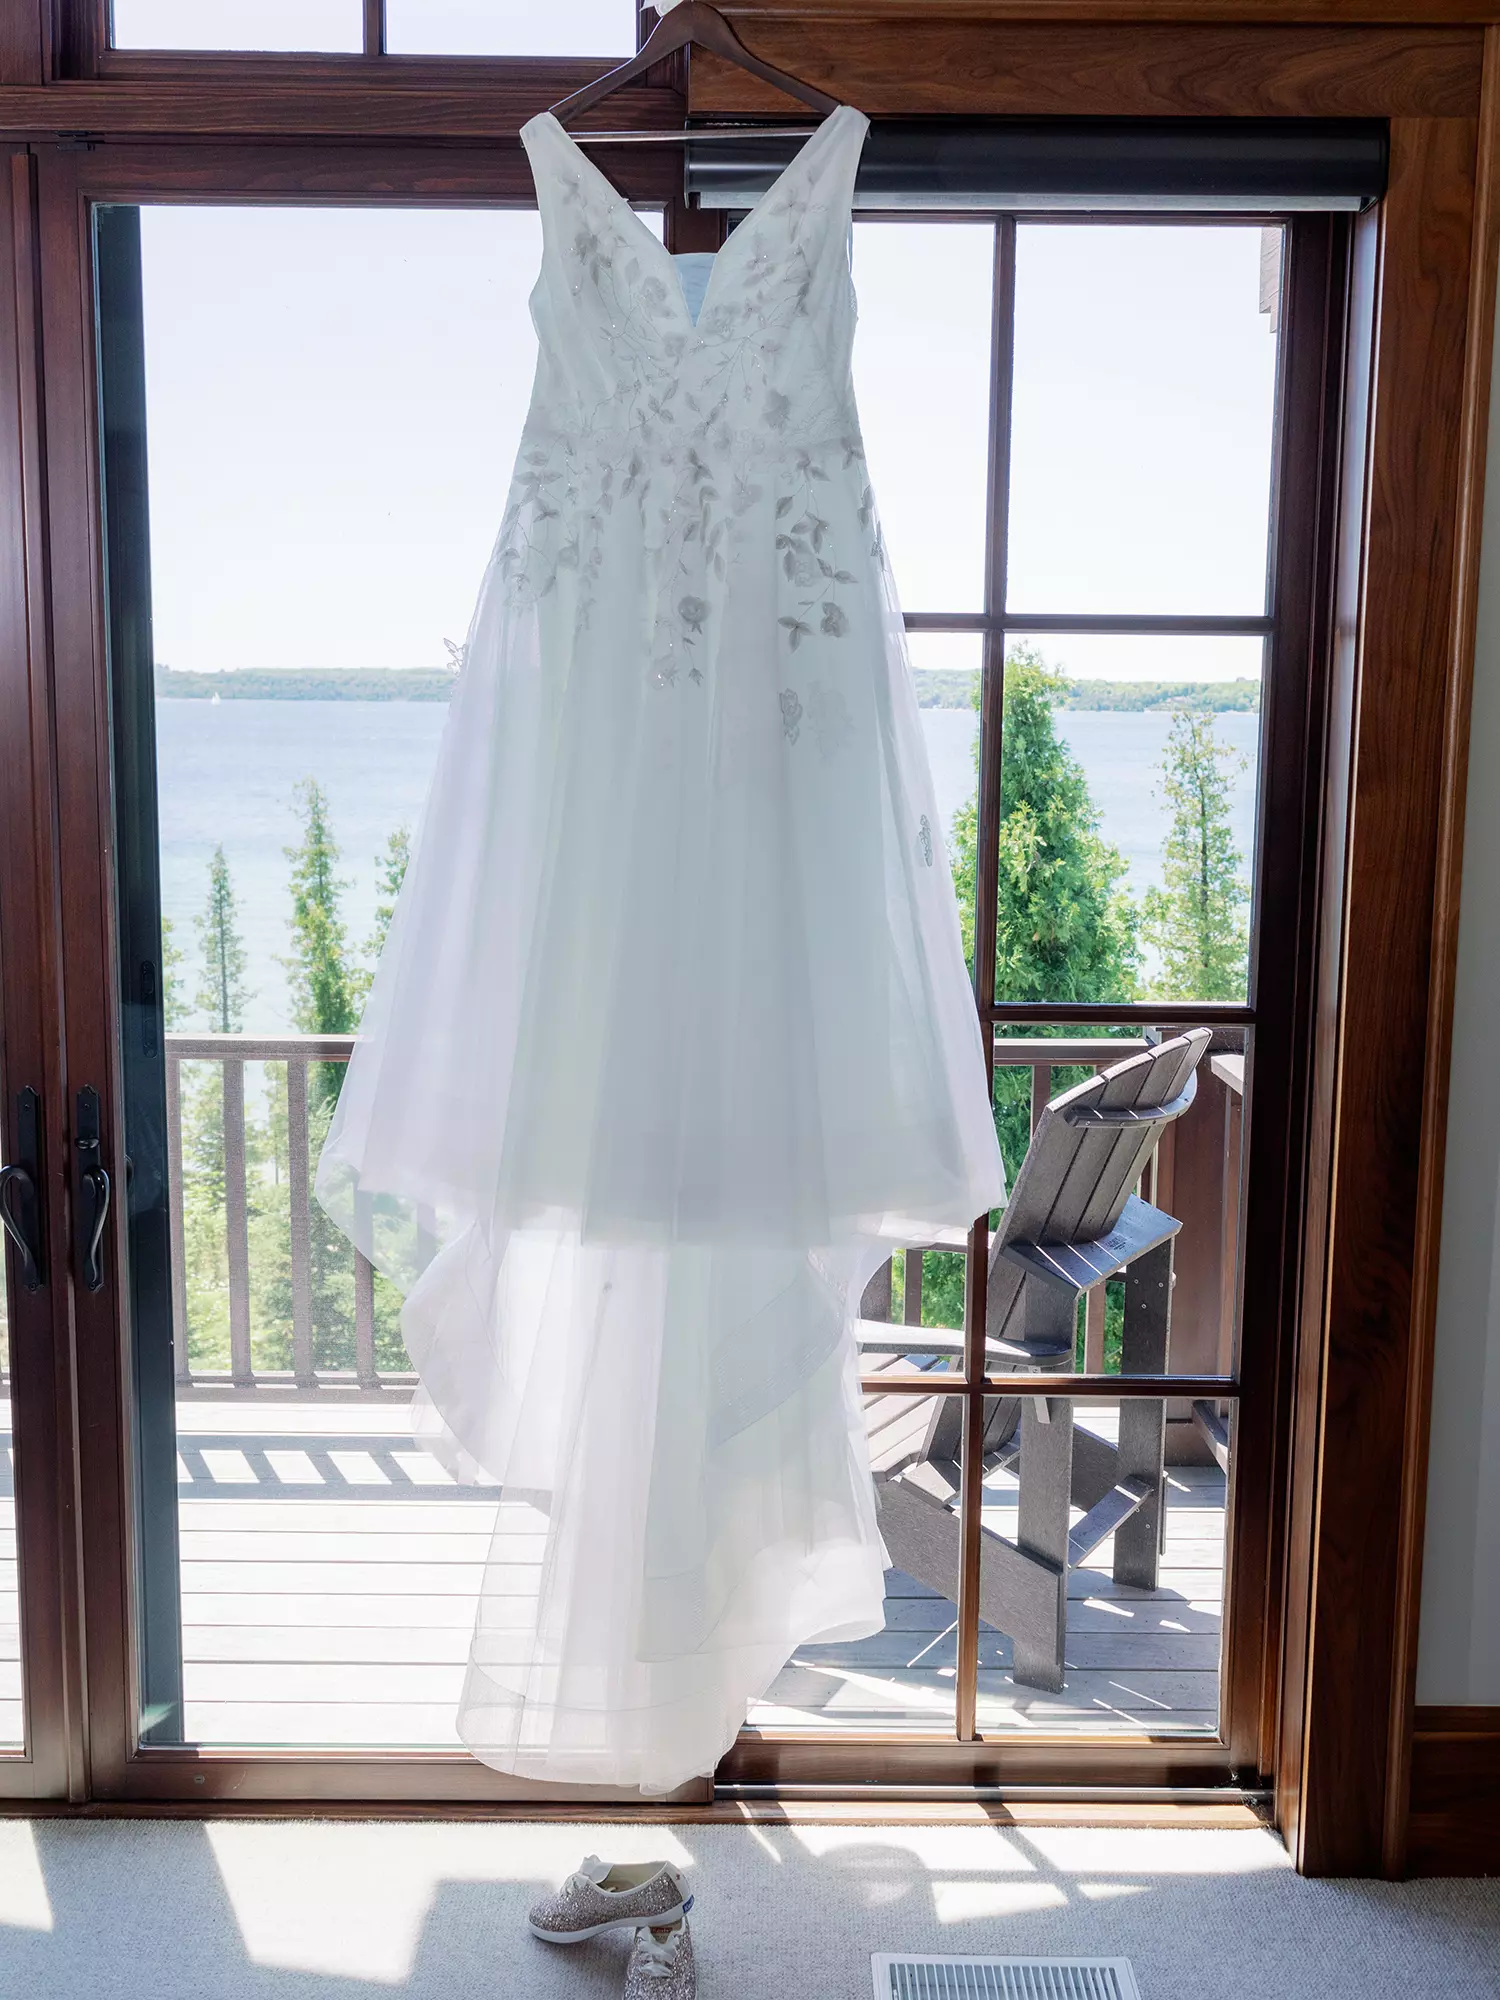 The Stylish Bride. Wedding Day services. Your “Ladies-in-Waiting” take care of everything you need on your wedding day — from steaming the wedding dress to repairing broken zippers. Wedding day dressers and stylists.